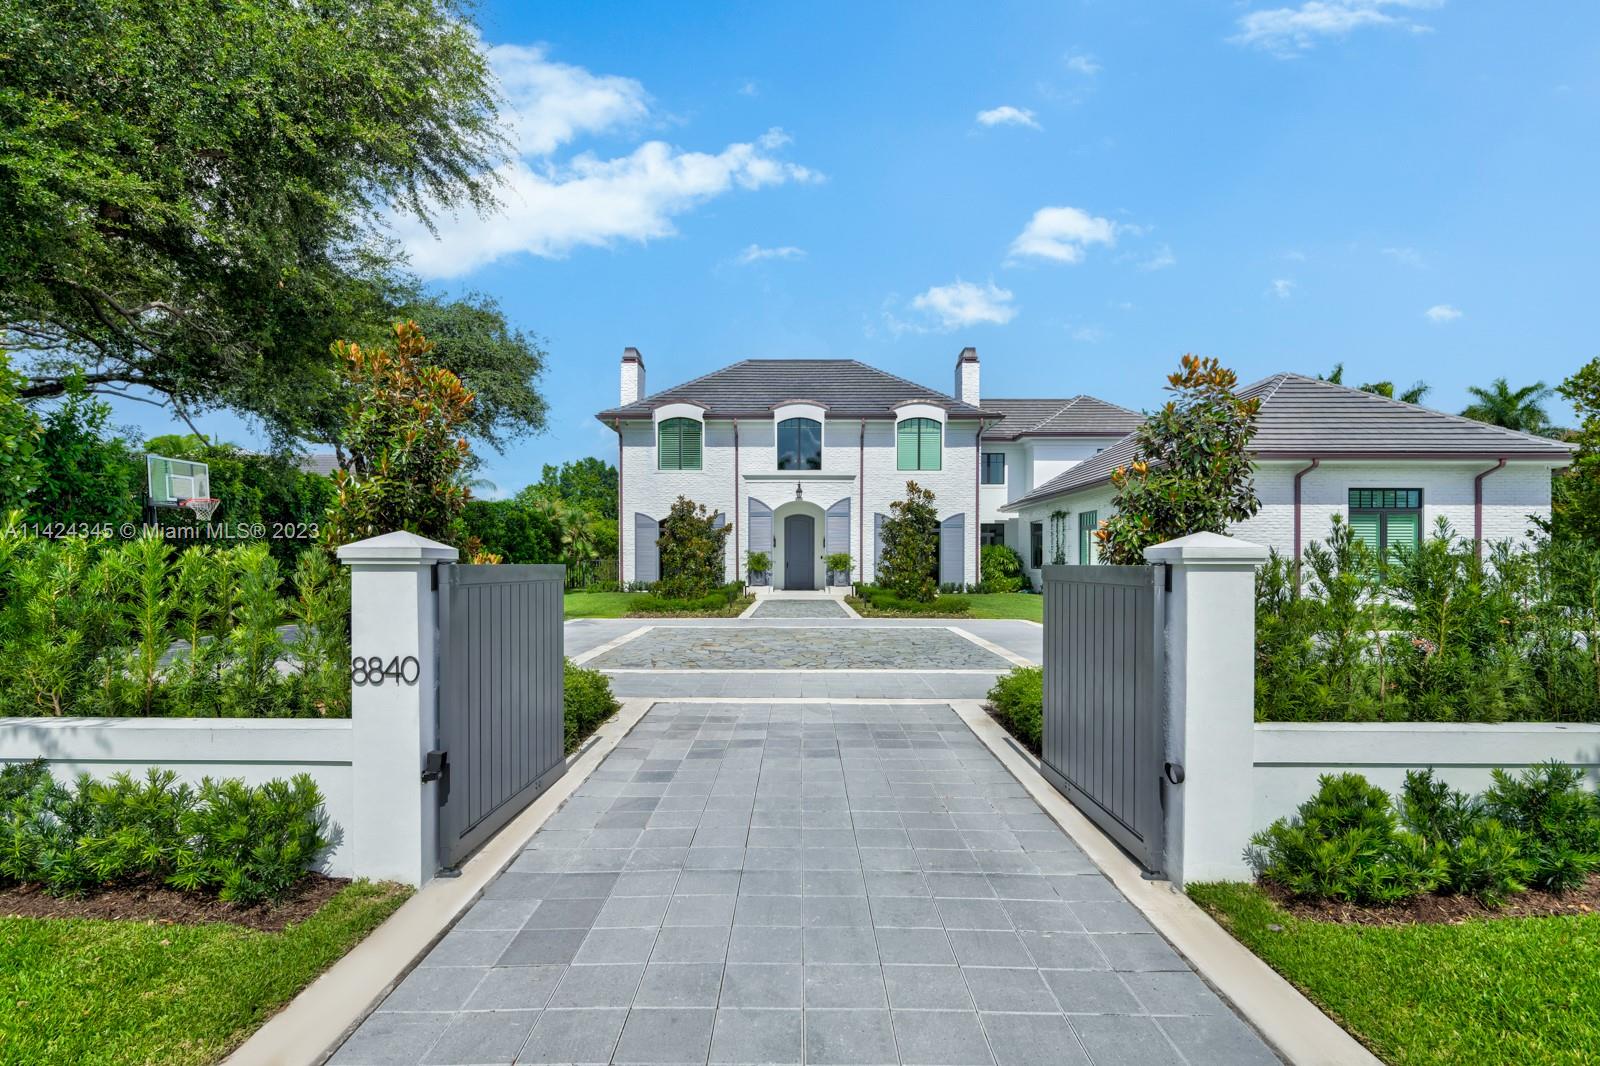 Welcome to this stunning home in N. Pinecrest. This Classic European design exudes elegance and sophistication. 7 beds & 7.5 baths, formal living w/bar and 380+ temp. controlled wine cellar, family rm w/surround sound, breakfast rm for informal daily use, formal dining and butler’s pantry for traditional dinner parties. A showstopper kitchen features a custom L’atalier Paris range, quartzite tops, hidden appliance cabinet, commercial grade exhaust. A whole-house 80 kW generator, elevator, tankless gas water heaters with circulating pump, and Smart-home system.  A/C in 4-car garage with room for a car lift. The backyard is perfect to enjoy the outdoors, shallow pool and hot tub, a cool misting system in the covered loggia, Full summer kitchen and plenty of space for entertaining year-round.